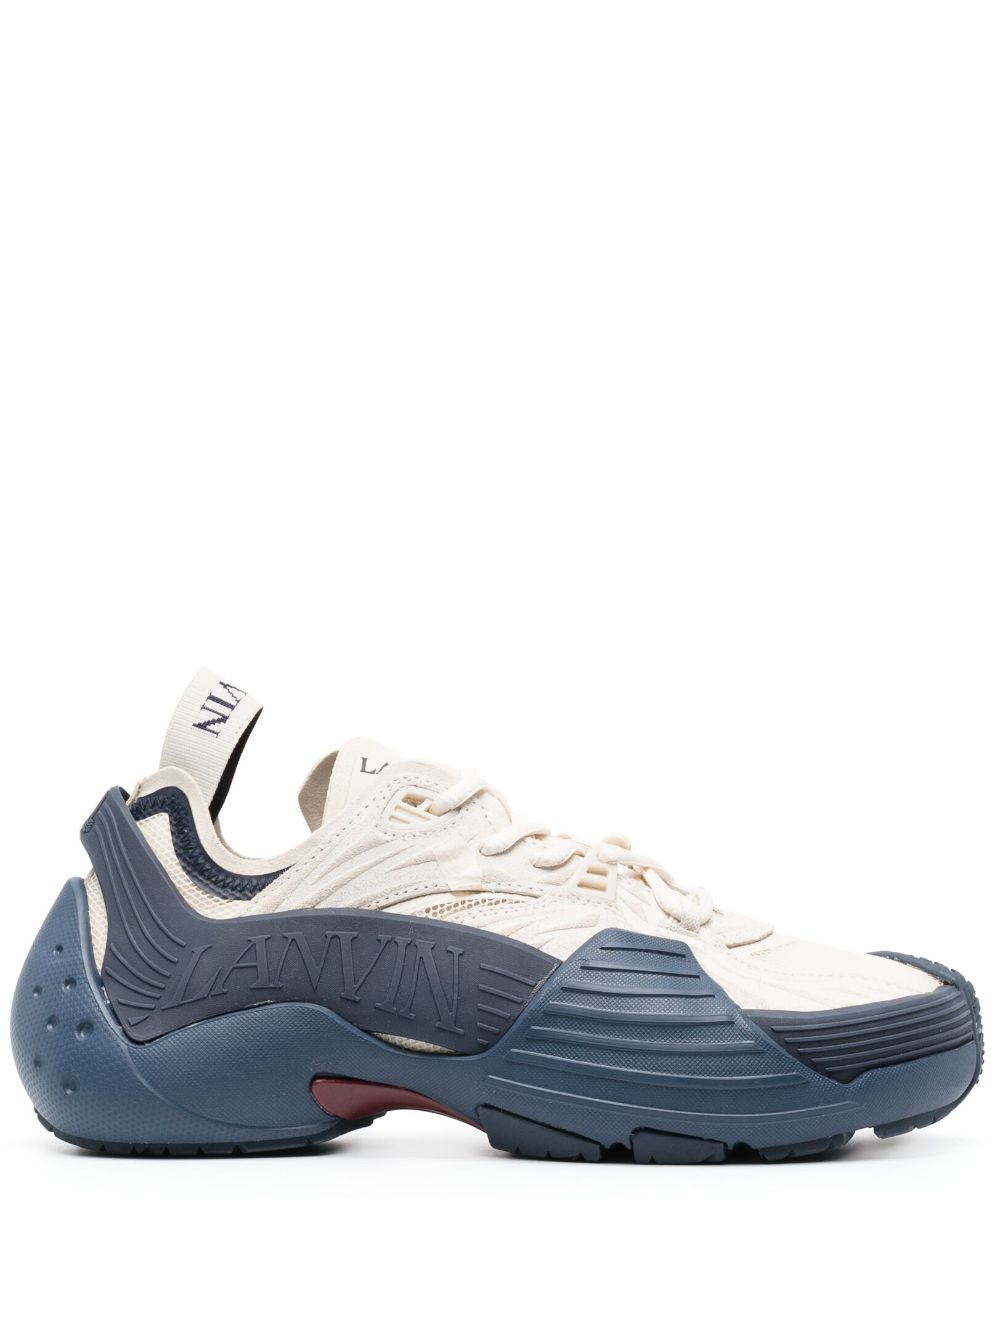 Image 1 of Lanvin Flash-X chunky low-top sneakers